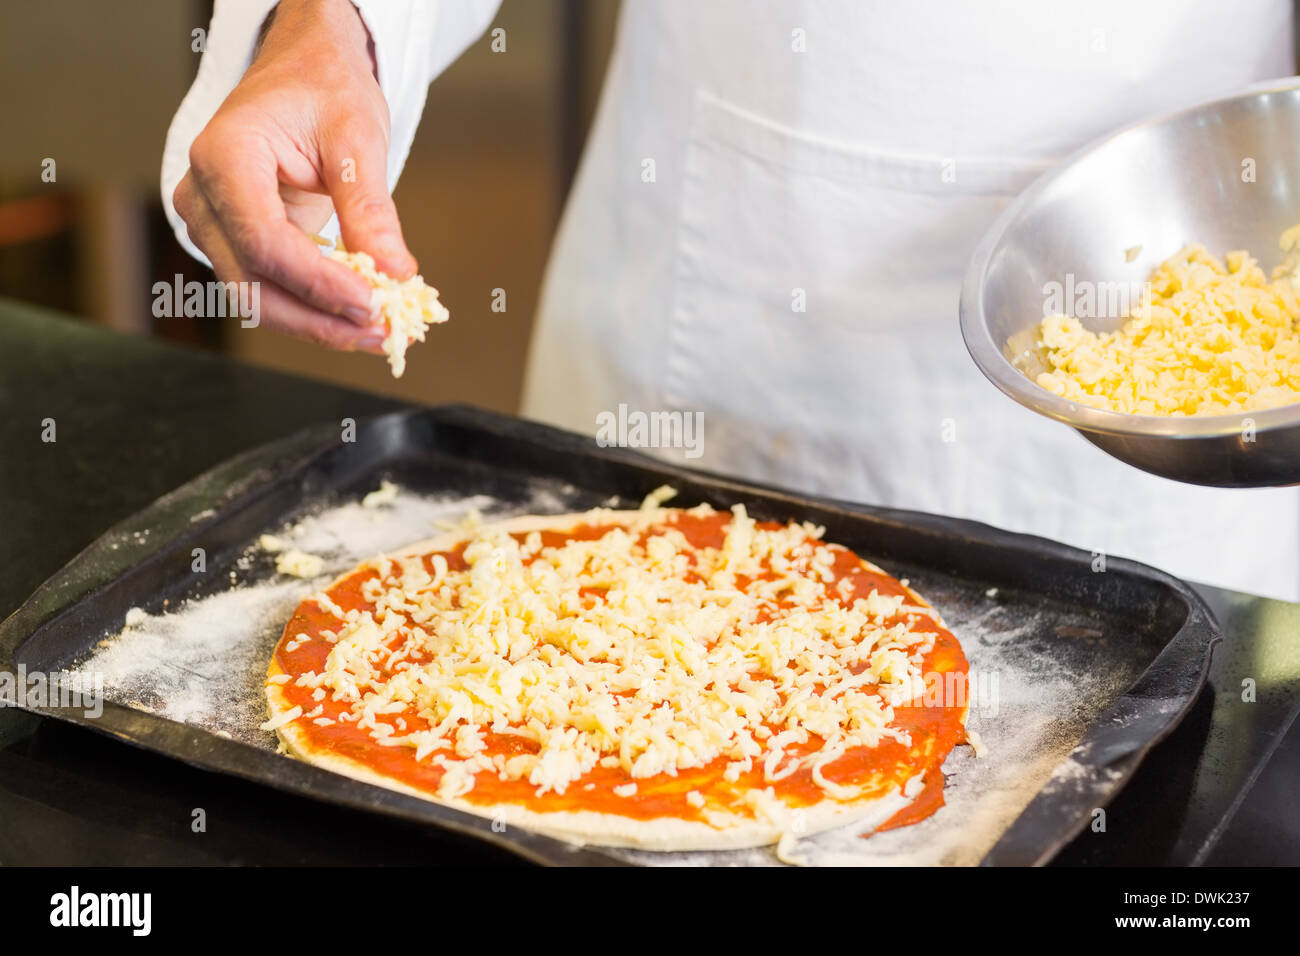 Mid section of a chef preparing pizza Stock Photo